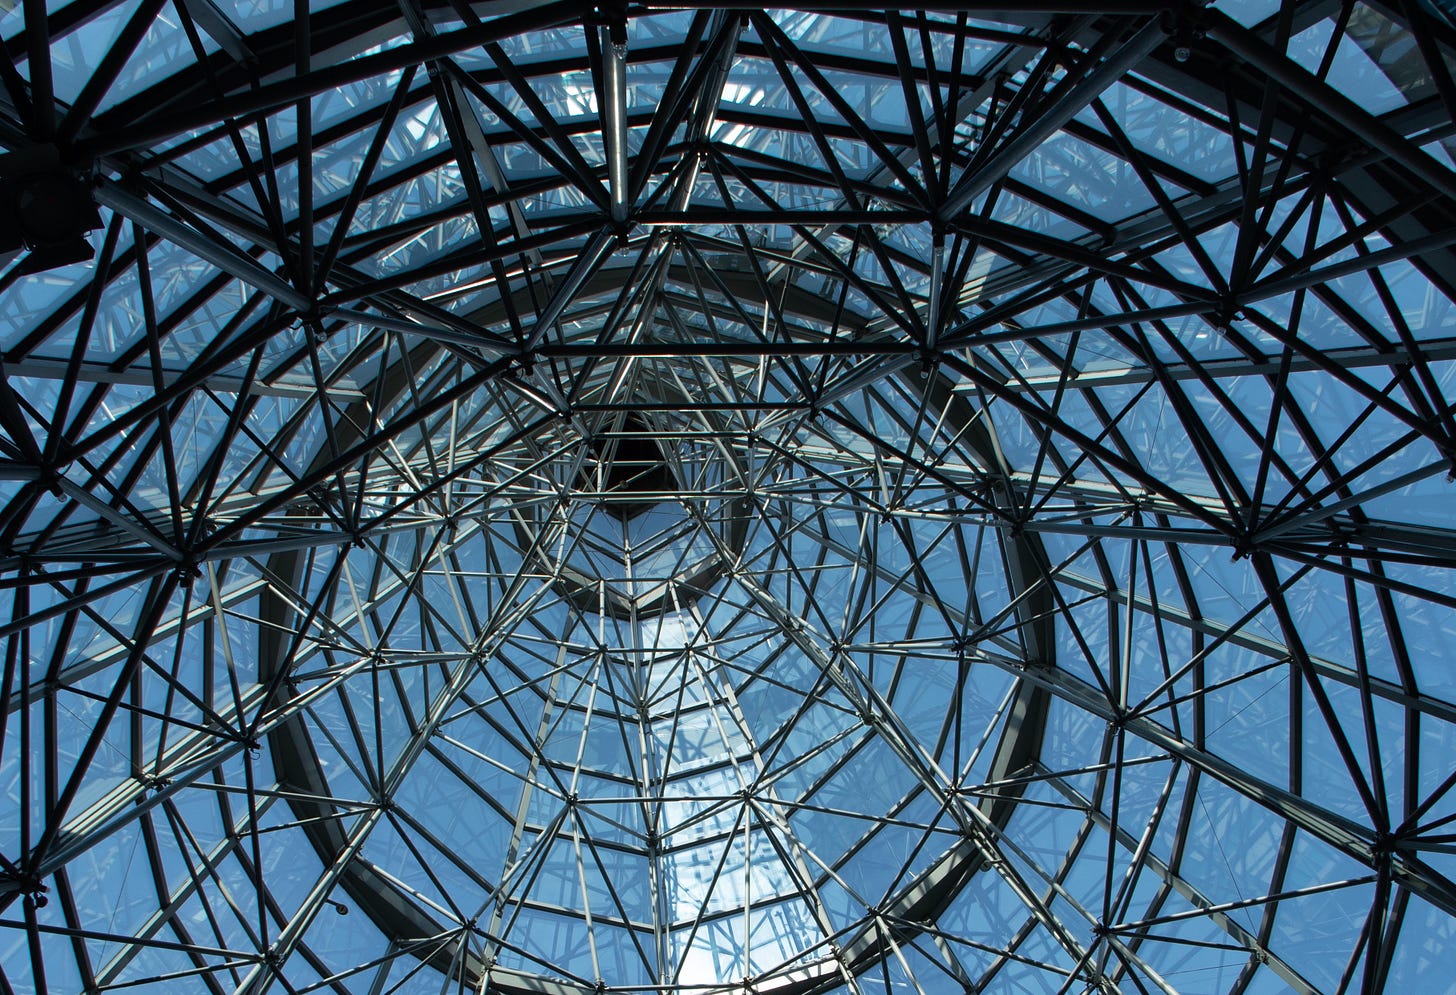 Image of a circular supporting structure made of metal